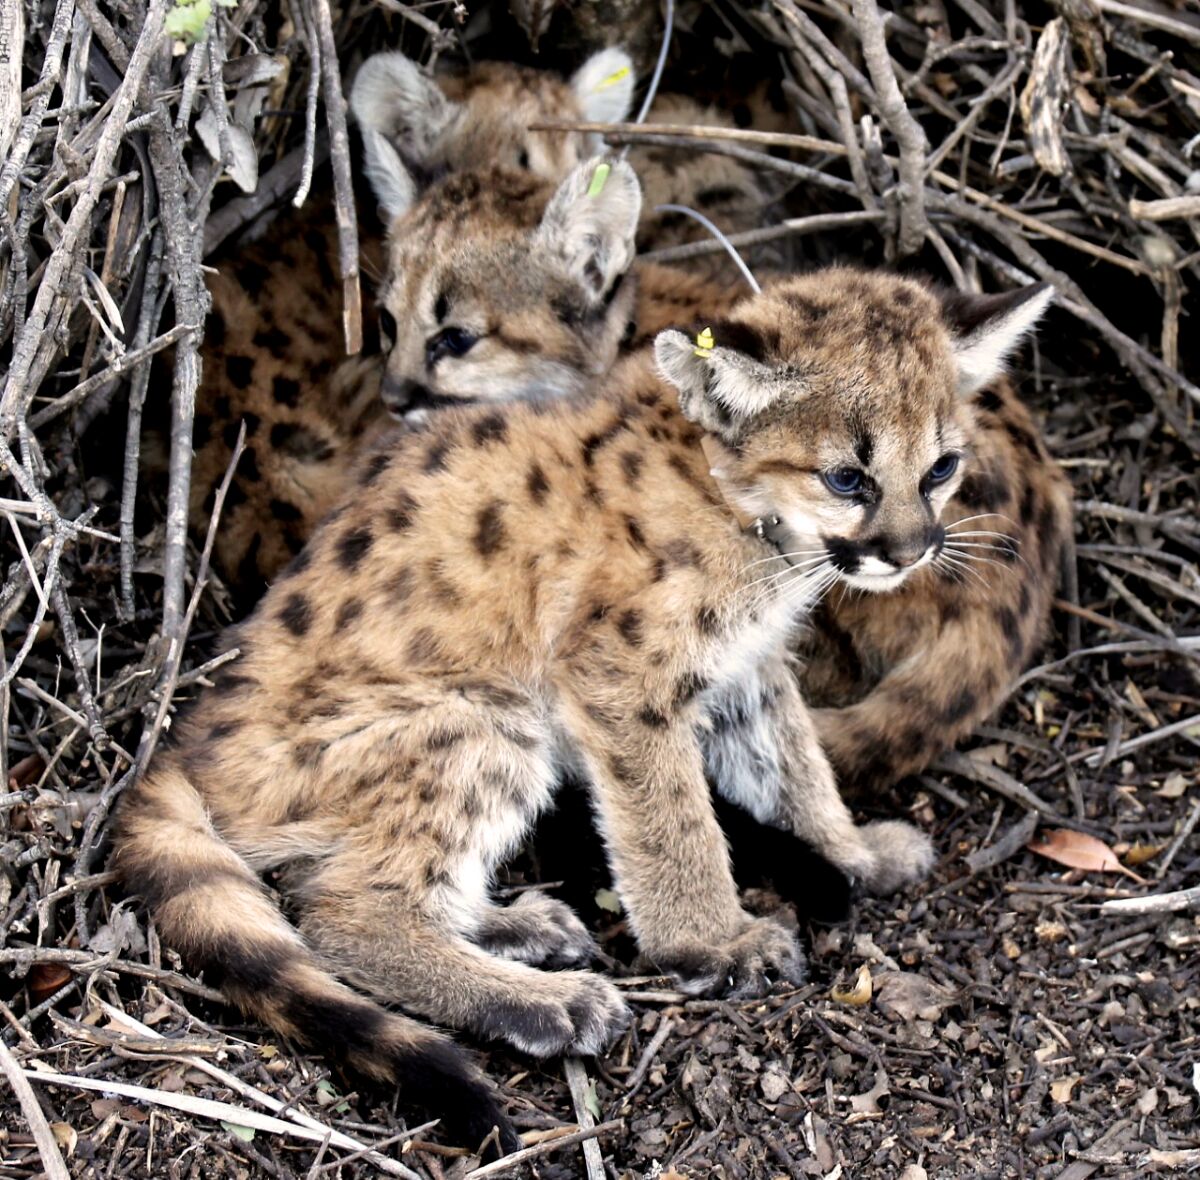 Four mountain lion kittens with ear tags huddled under brush